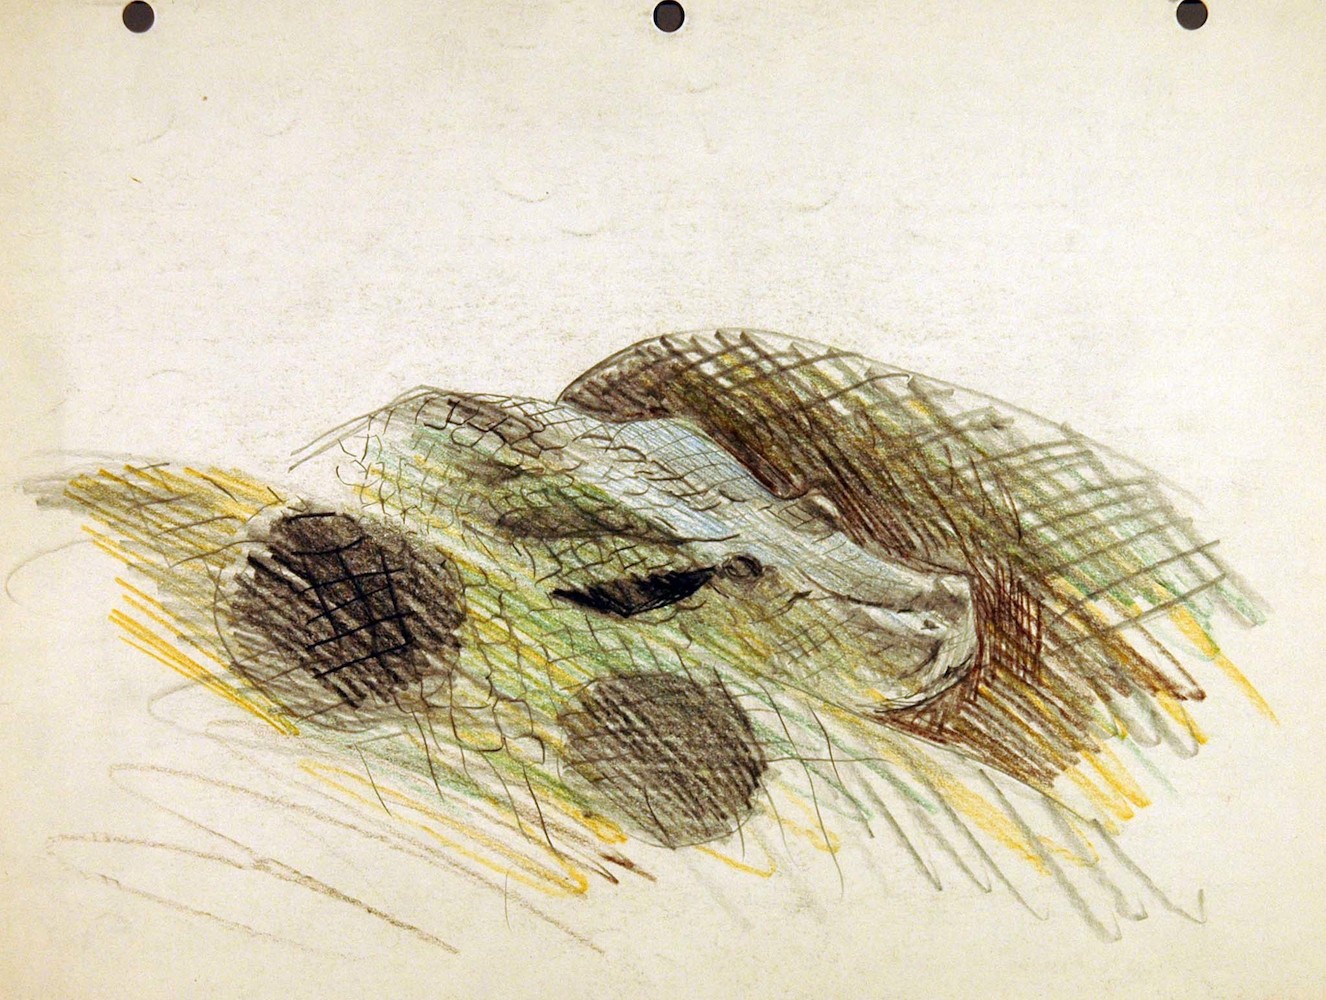 Reptiles. Study of a Snake Head